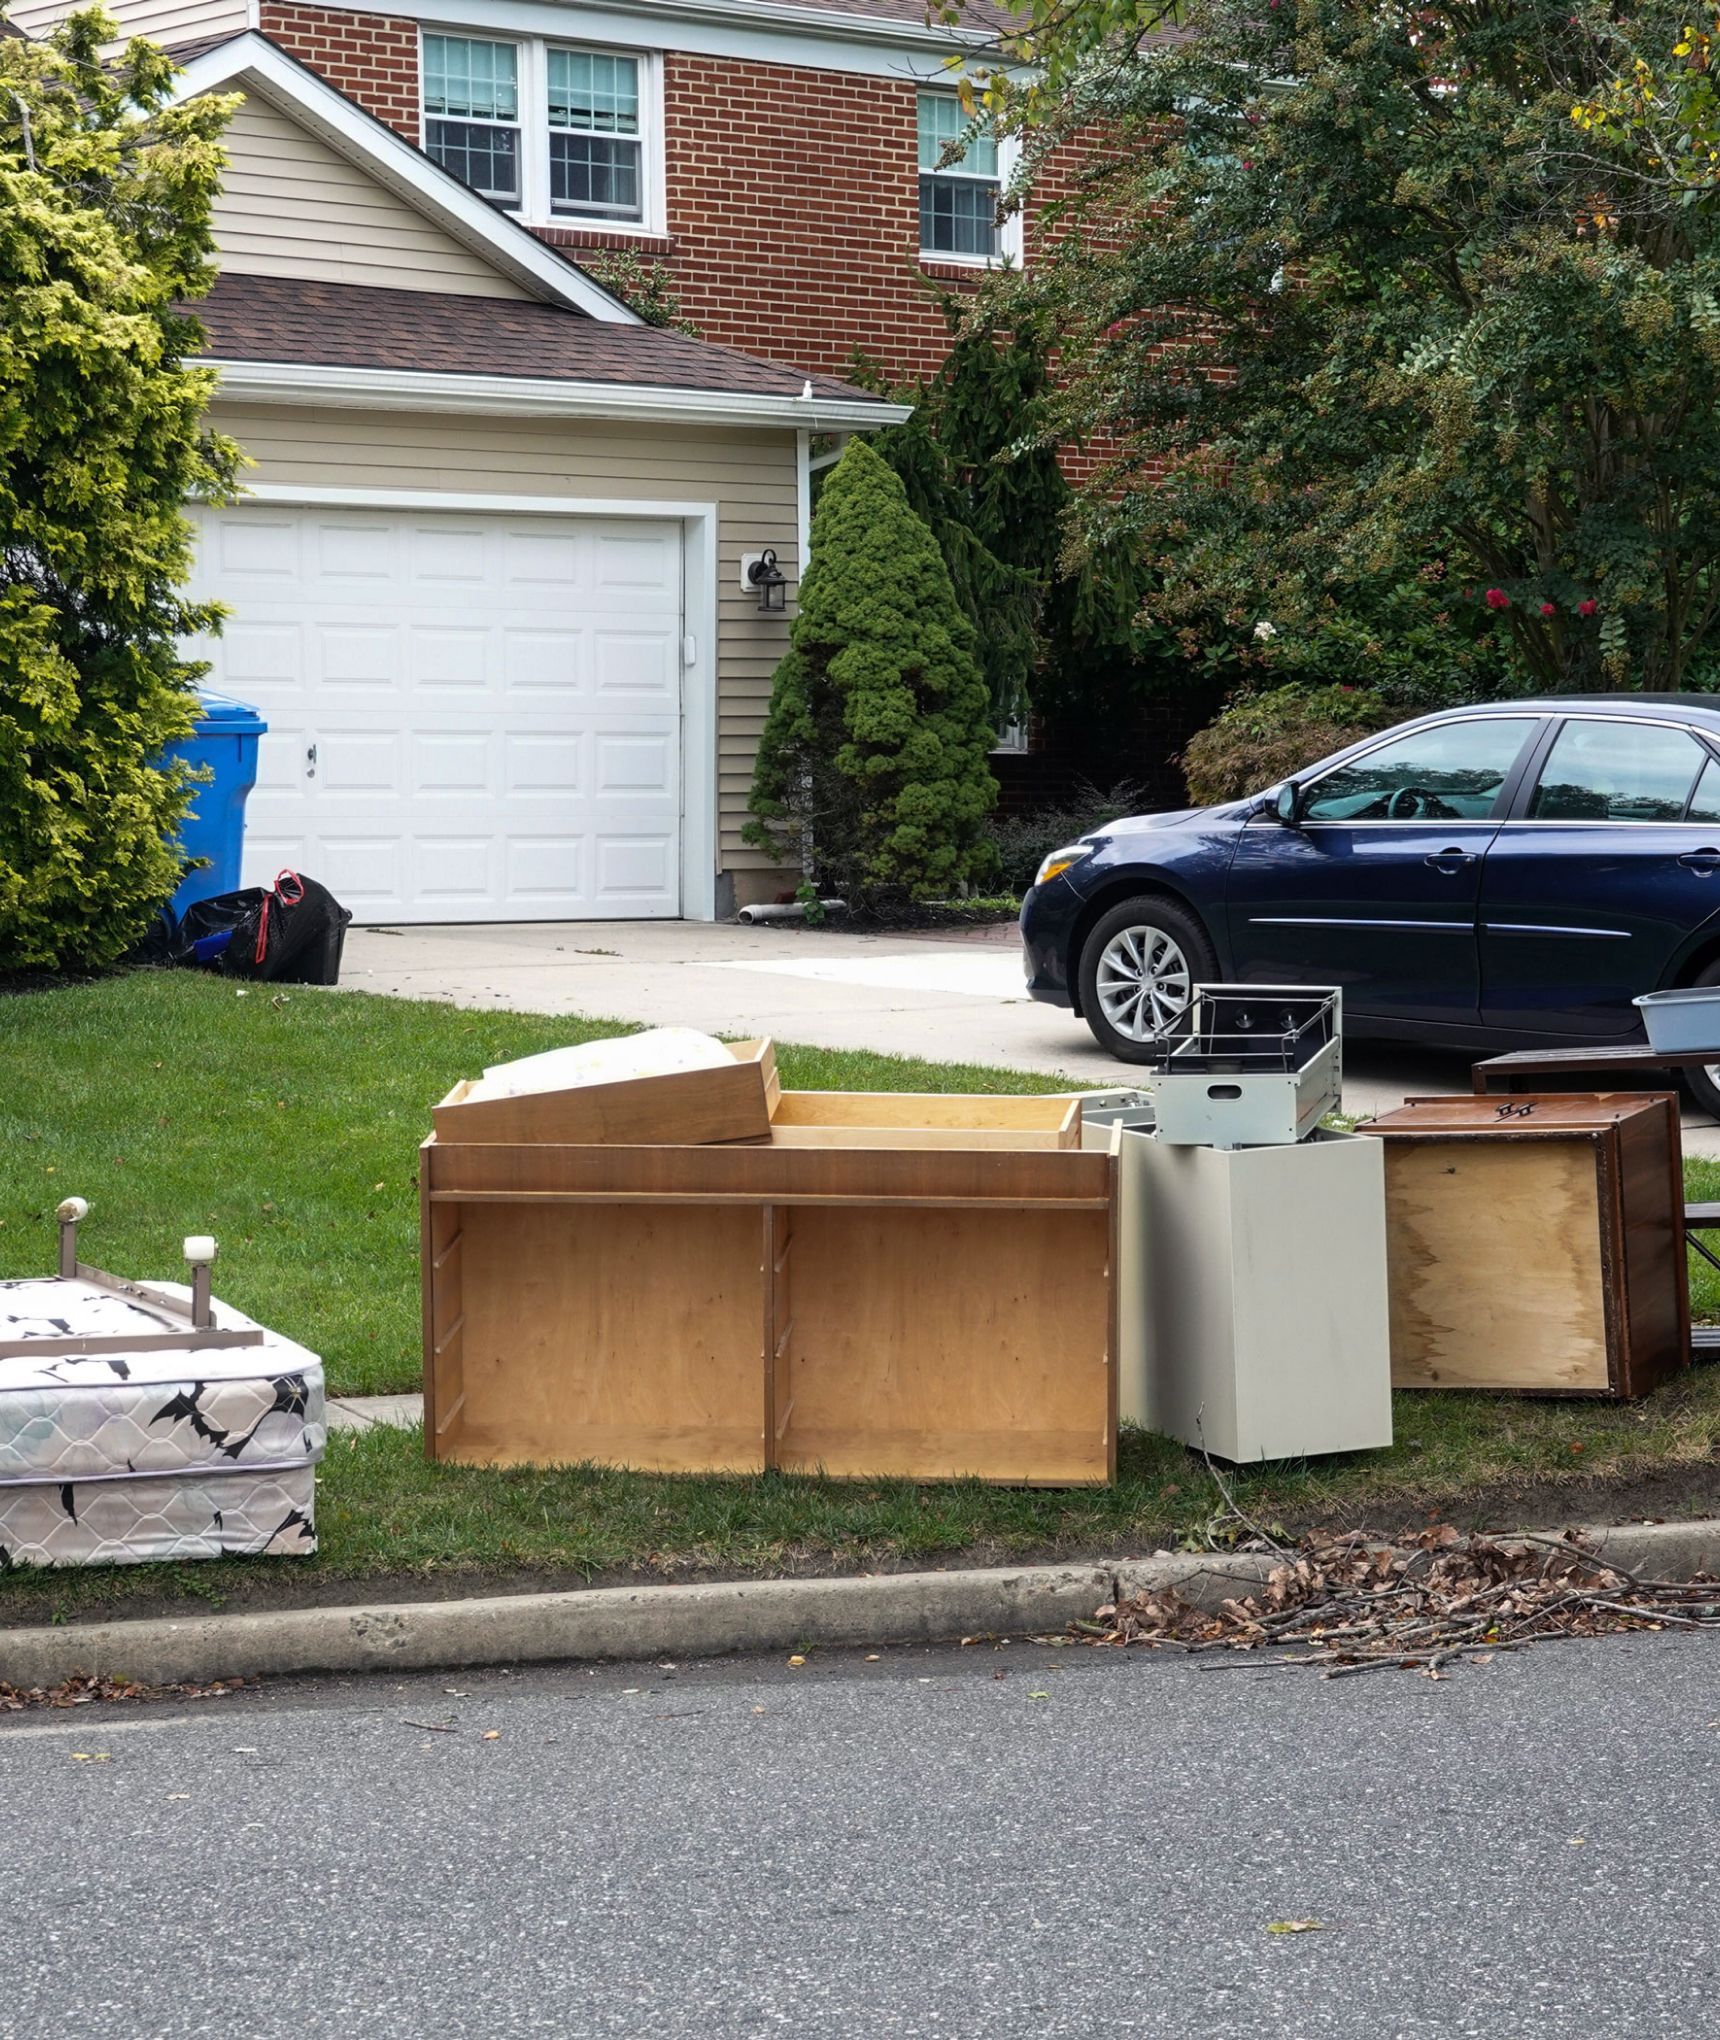 Residential junk removal